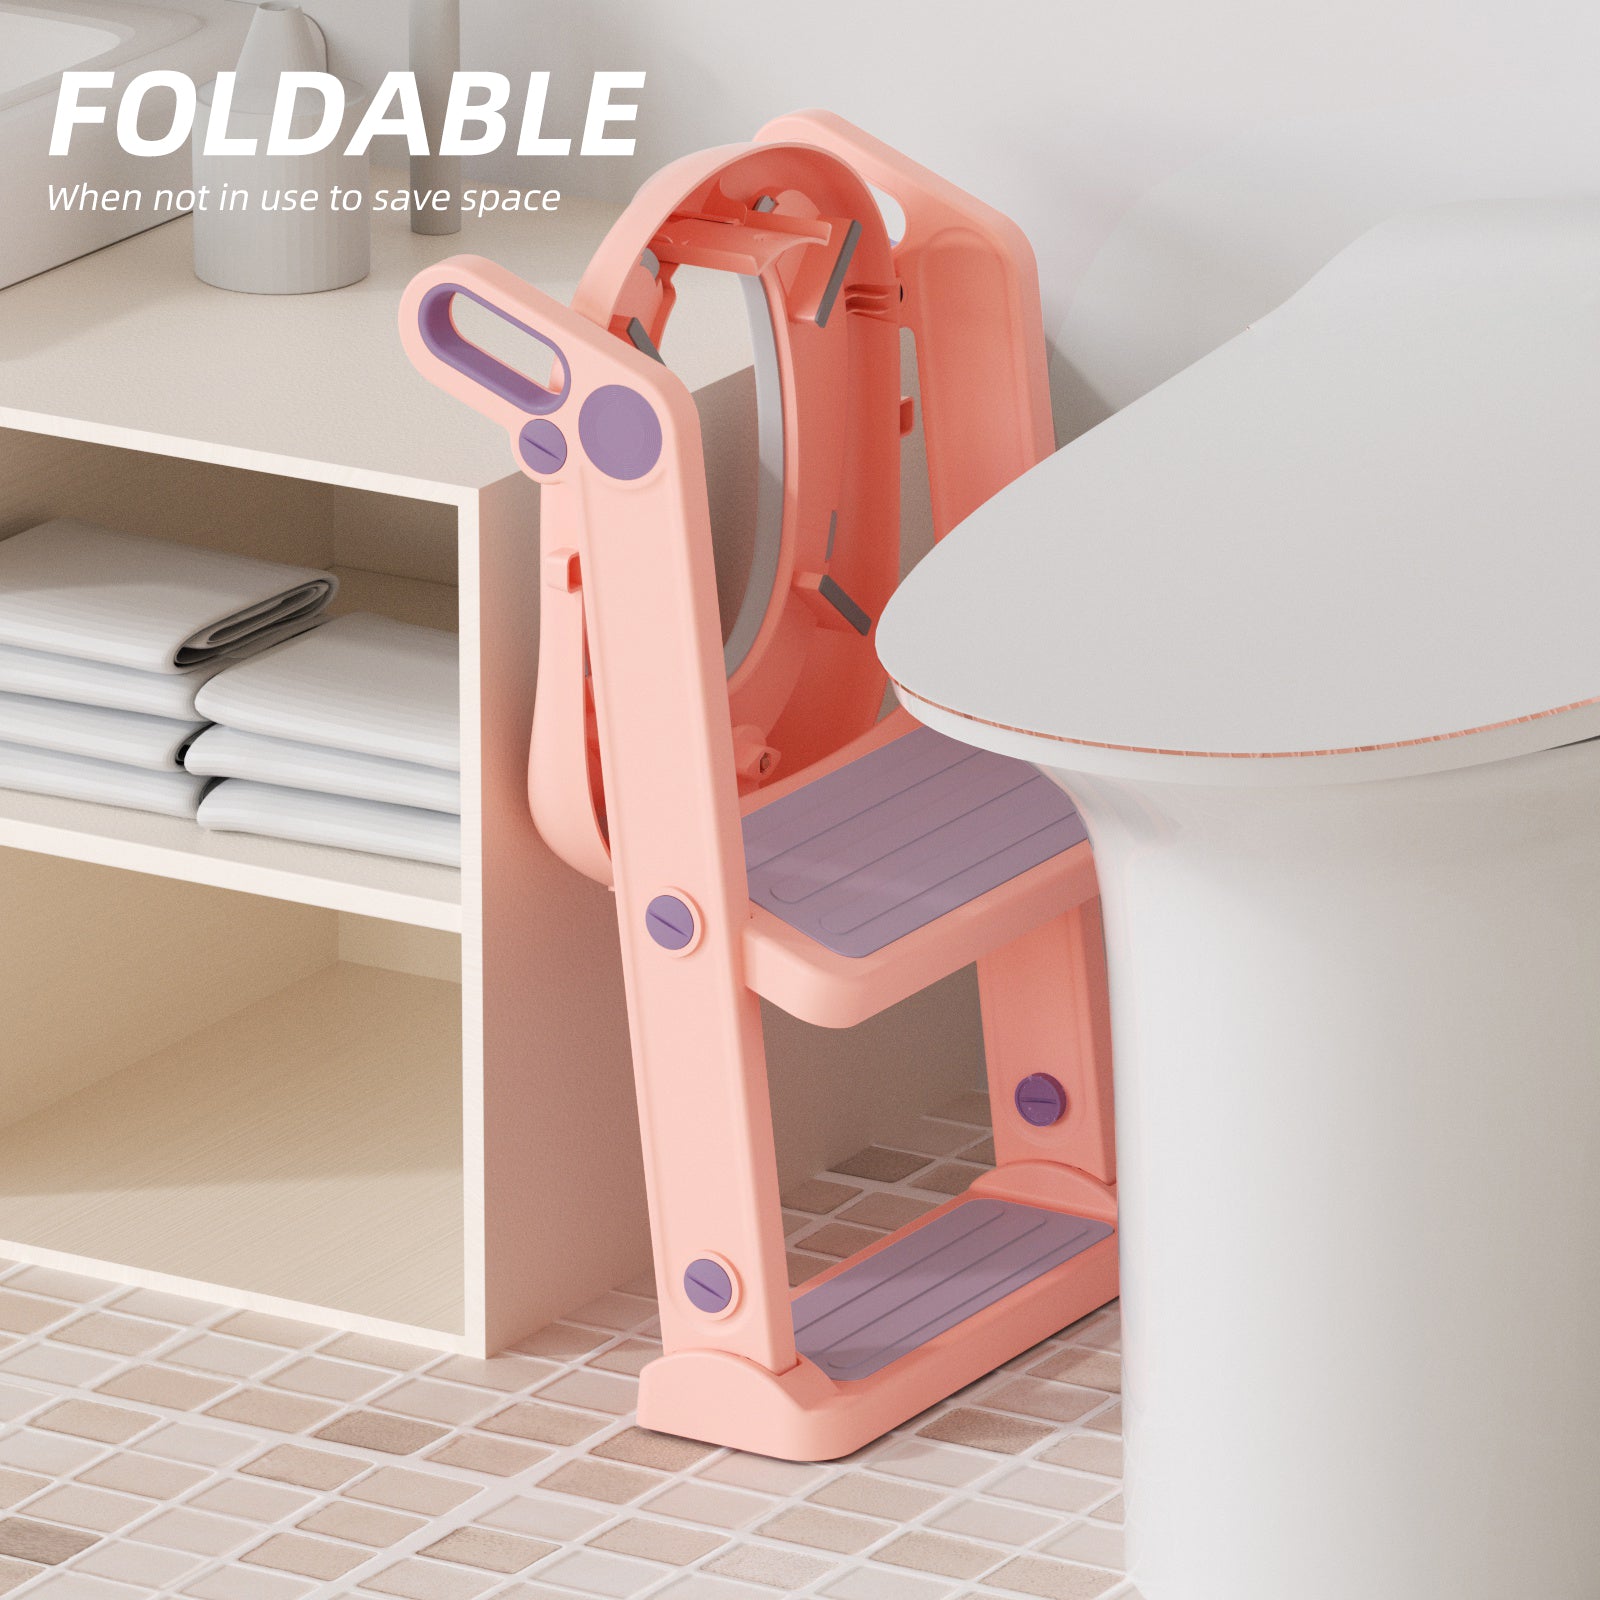 XJD Kids Toilet Training Seat with Step Ladder Pink In Stock USA